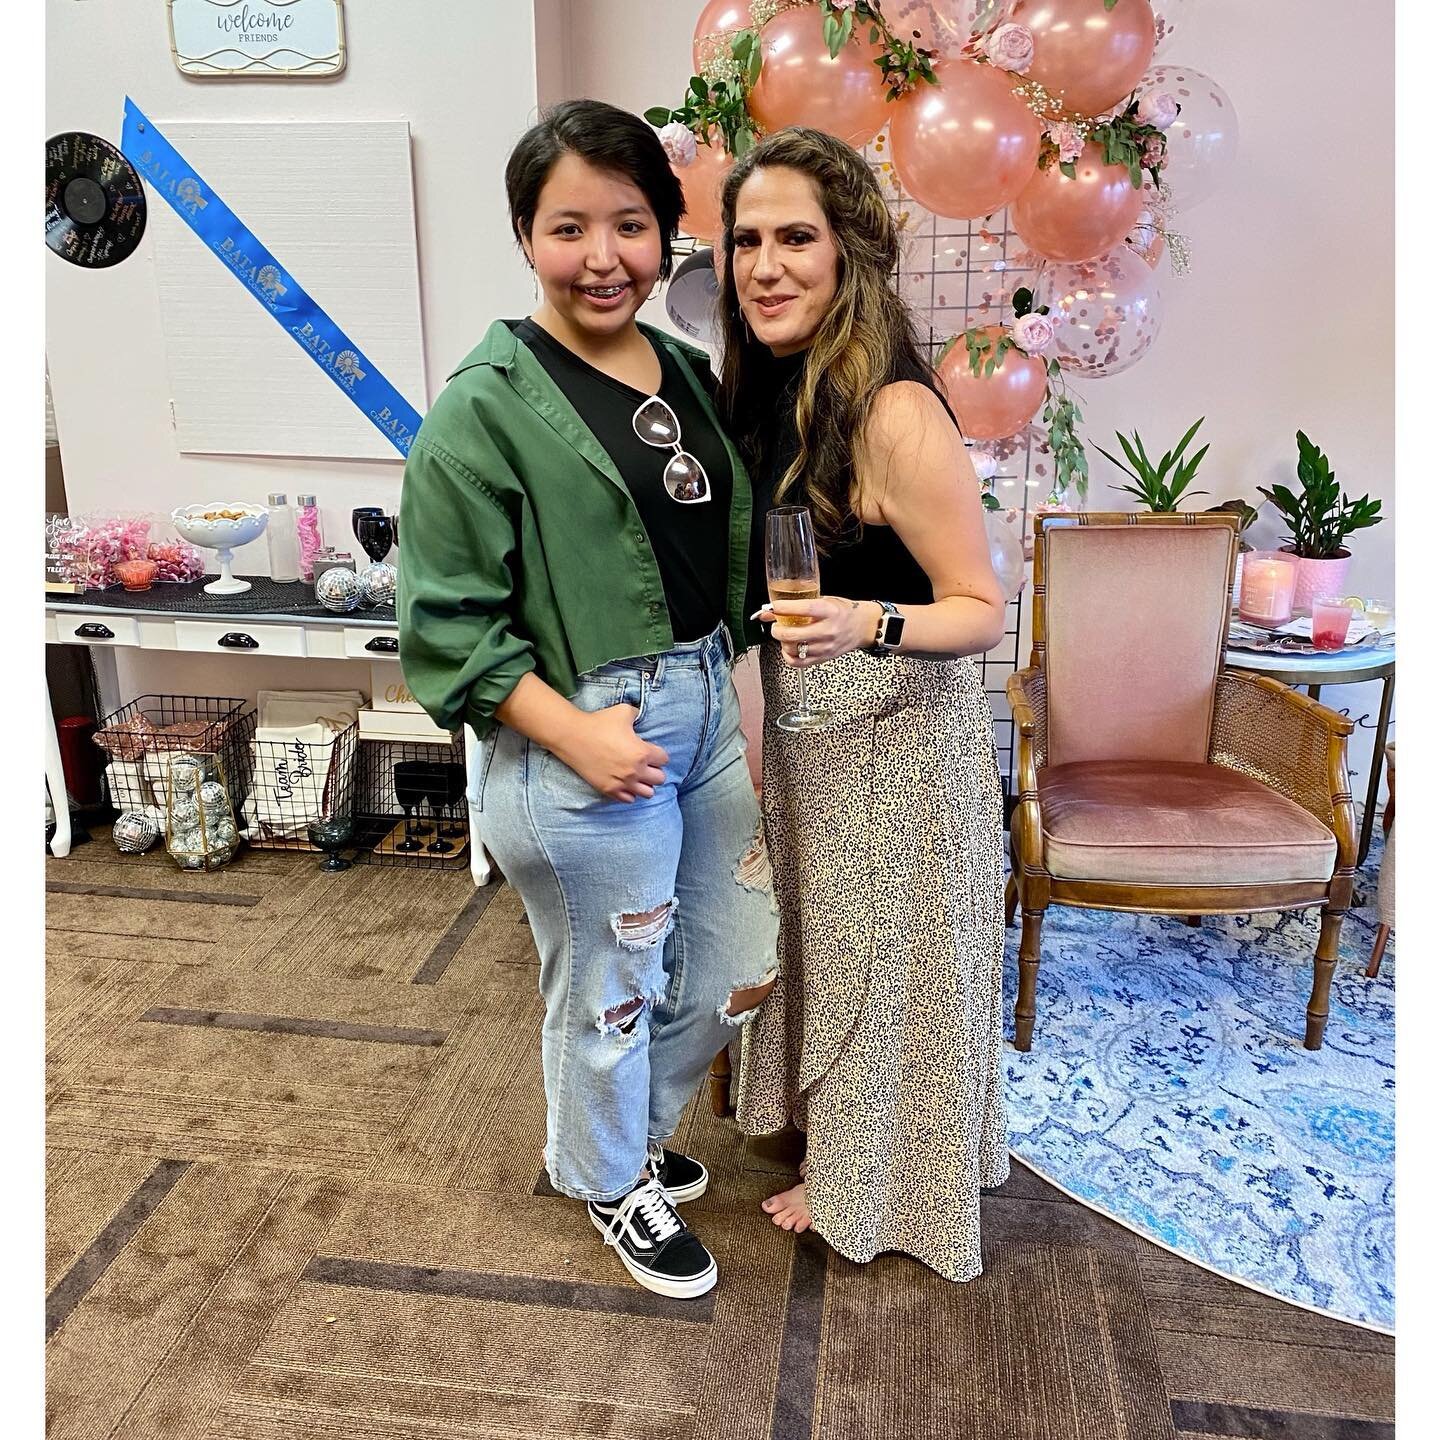 Congratulations to Fatiana for opening Chic Events And Weddings, her store front on Saturday! It was so beautiful and seeing her dream come true is something amazing! I&rsquo;m glad I met you 2 years ago, and I hope we can continue to root for each o